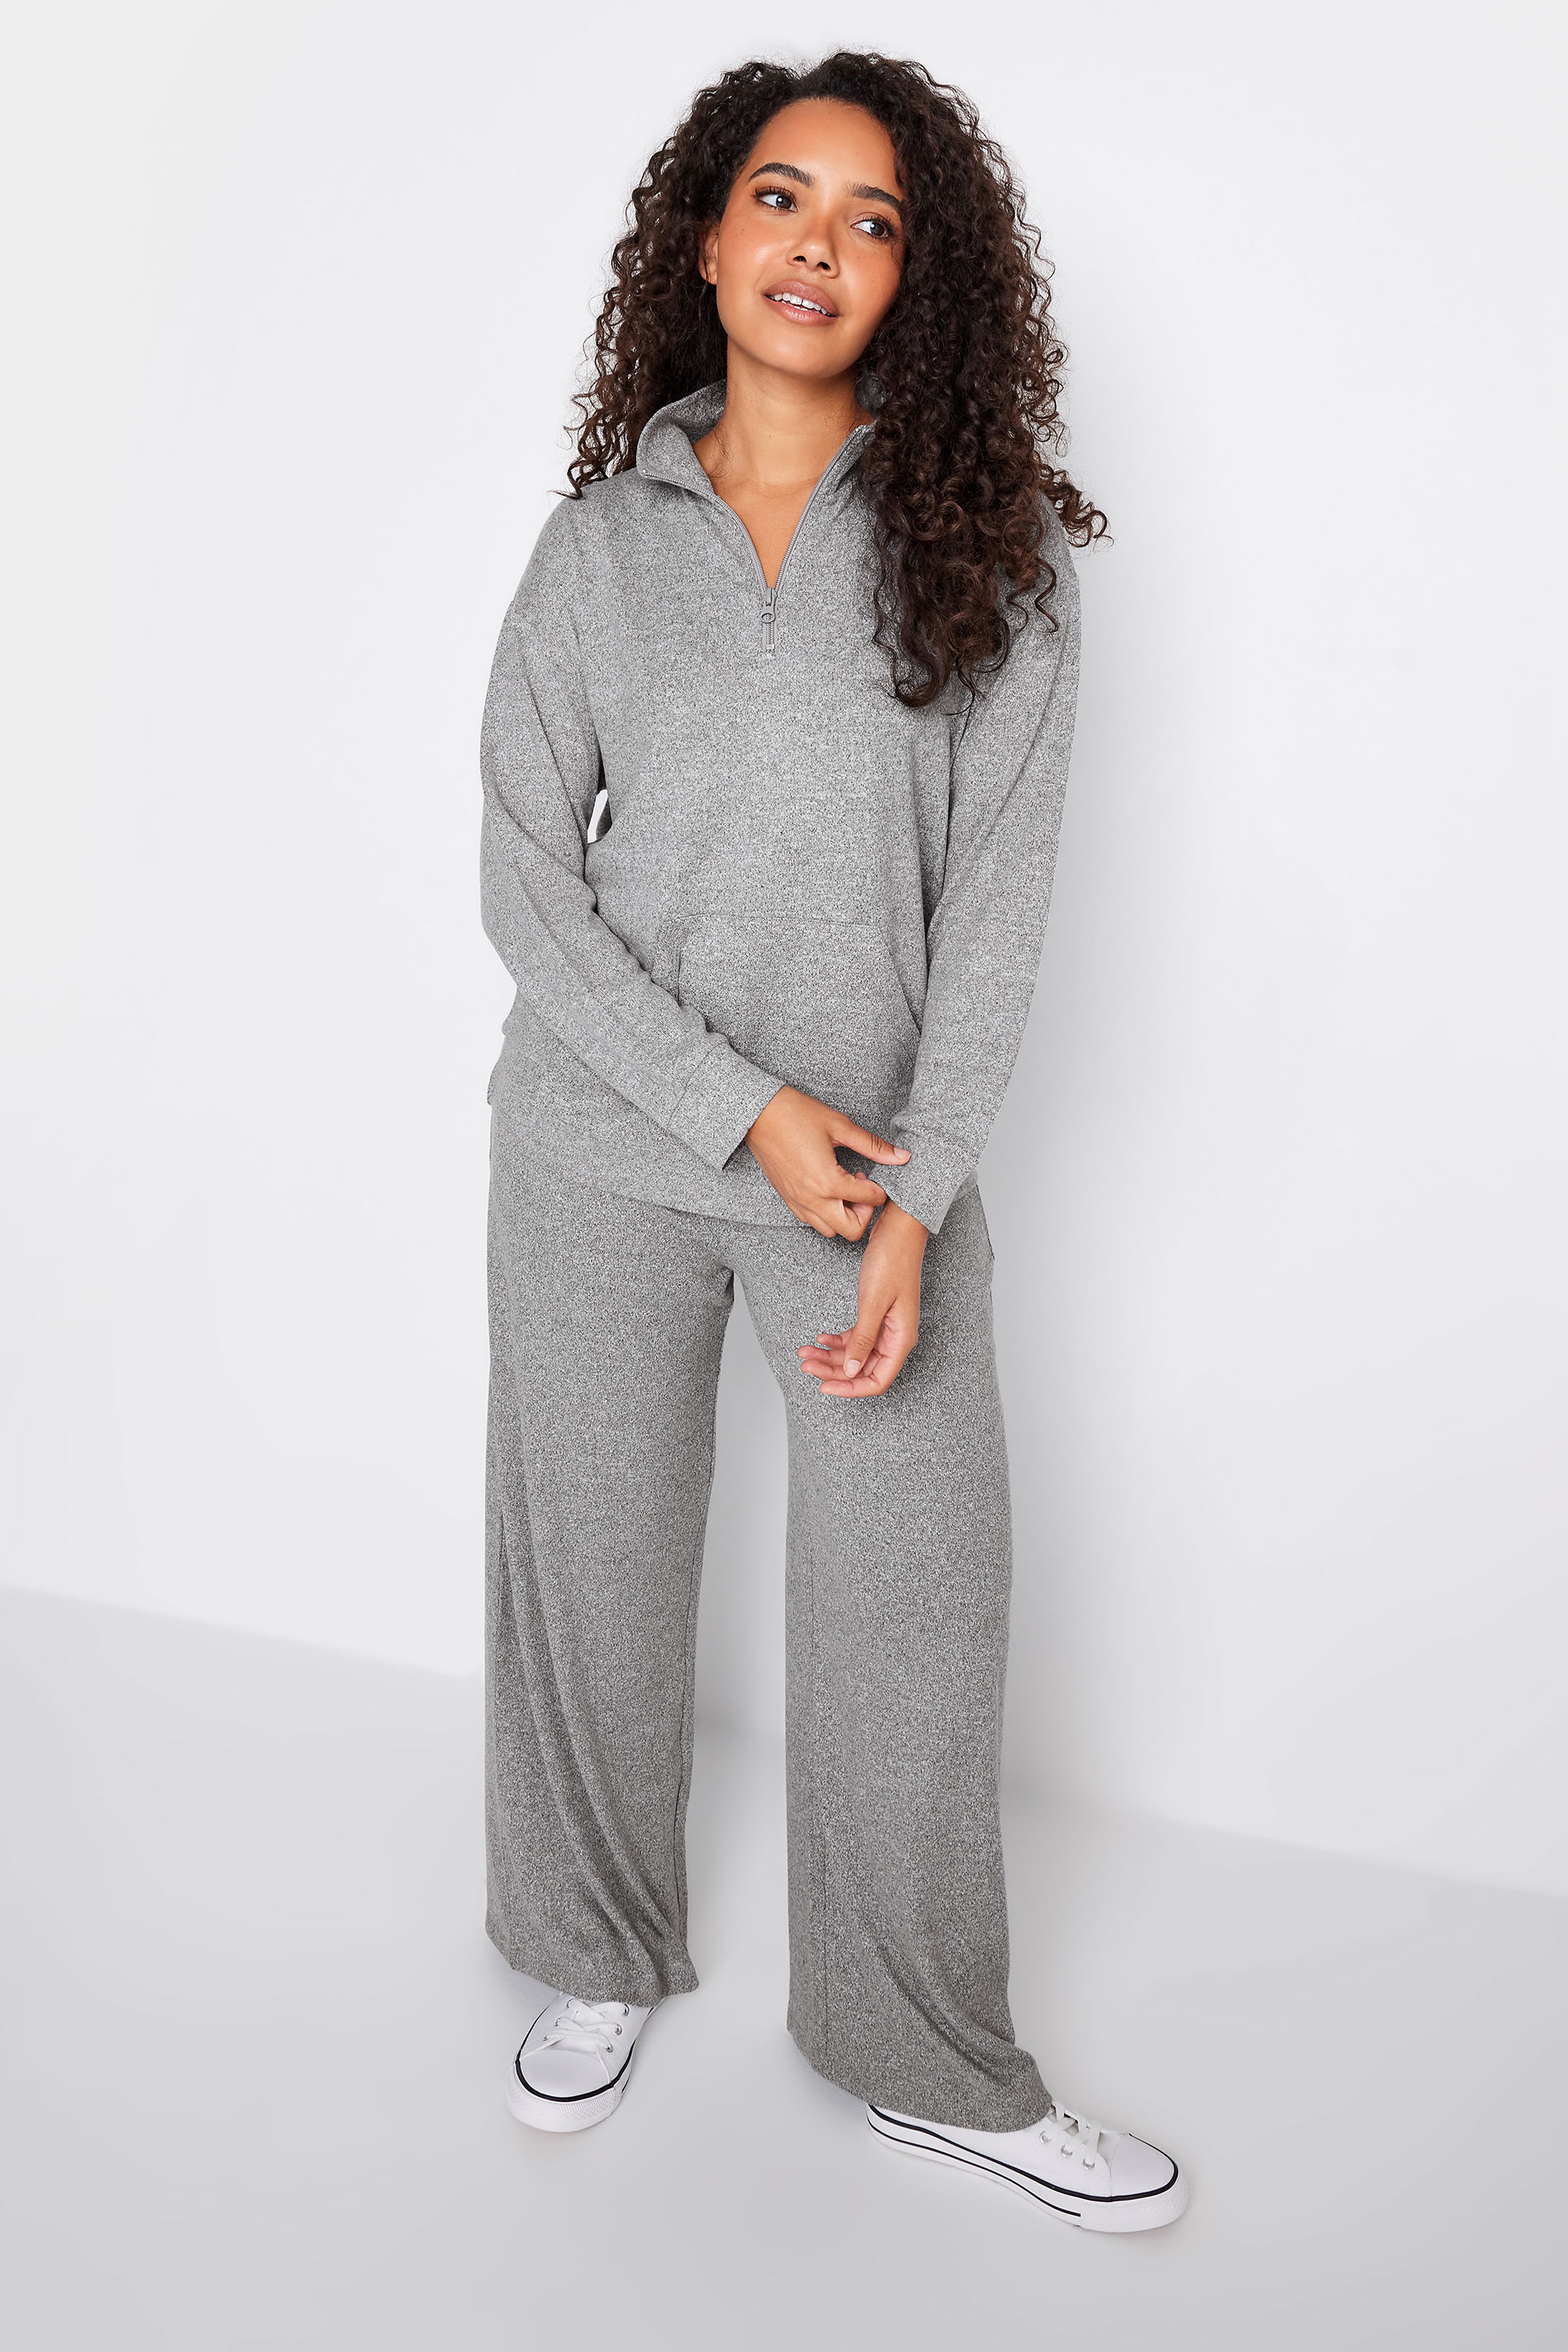 M&Co Grey Soft Touch Zip Lounge Top | M&Co